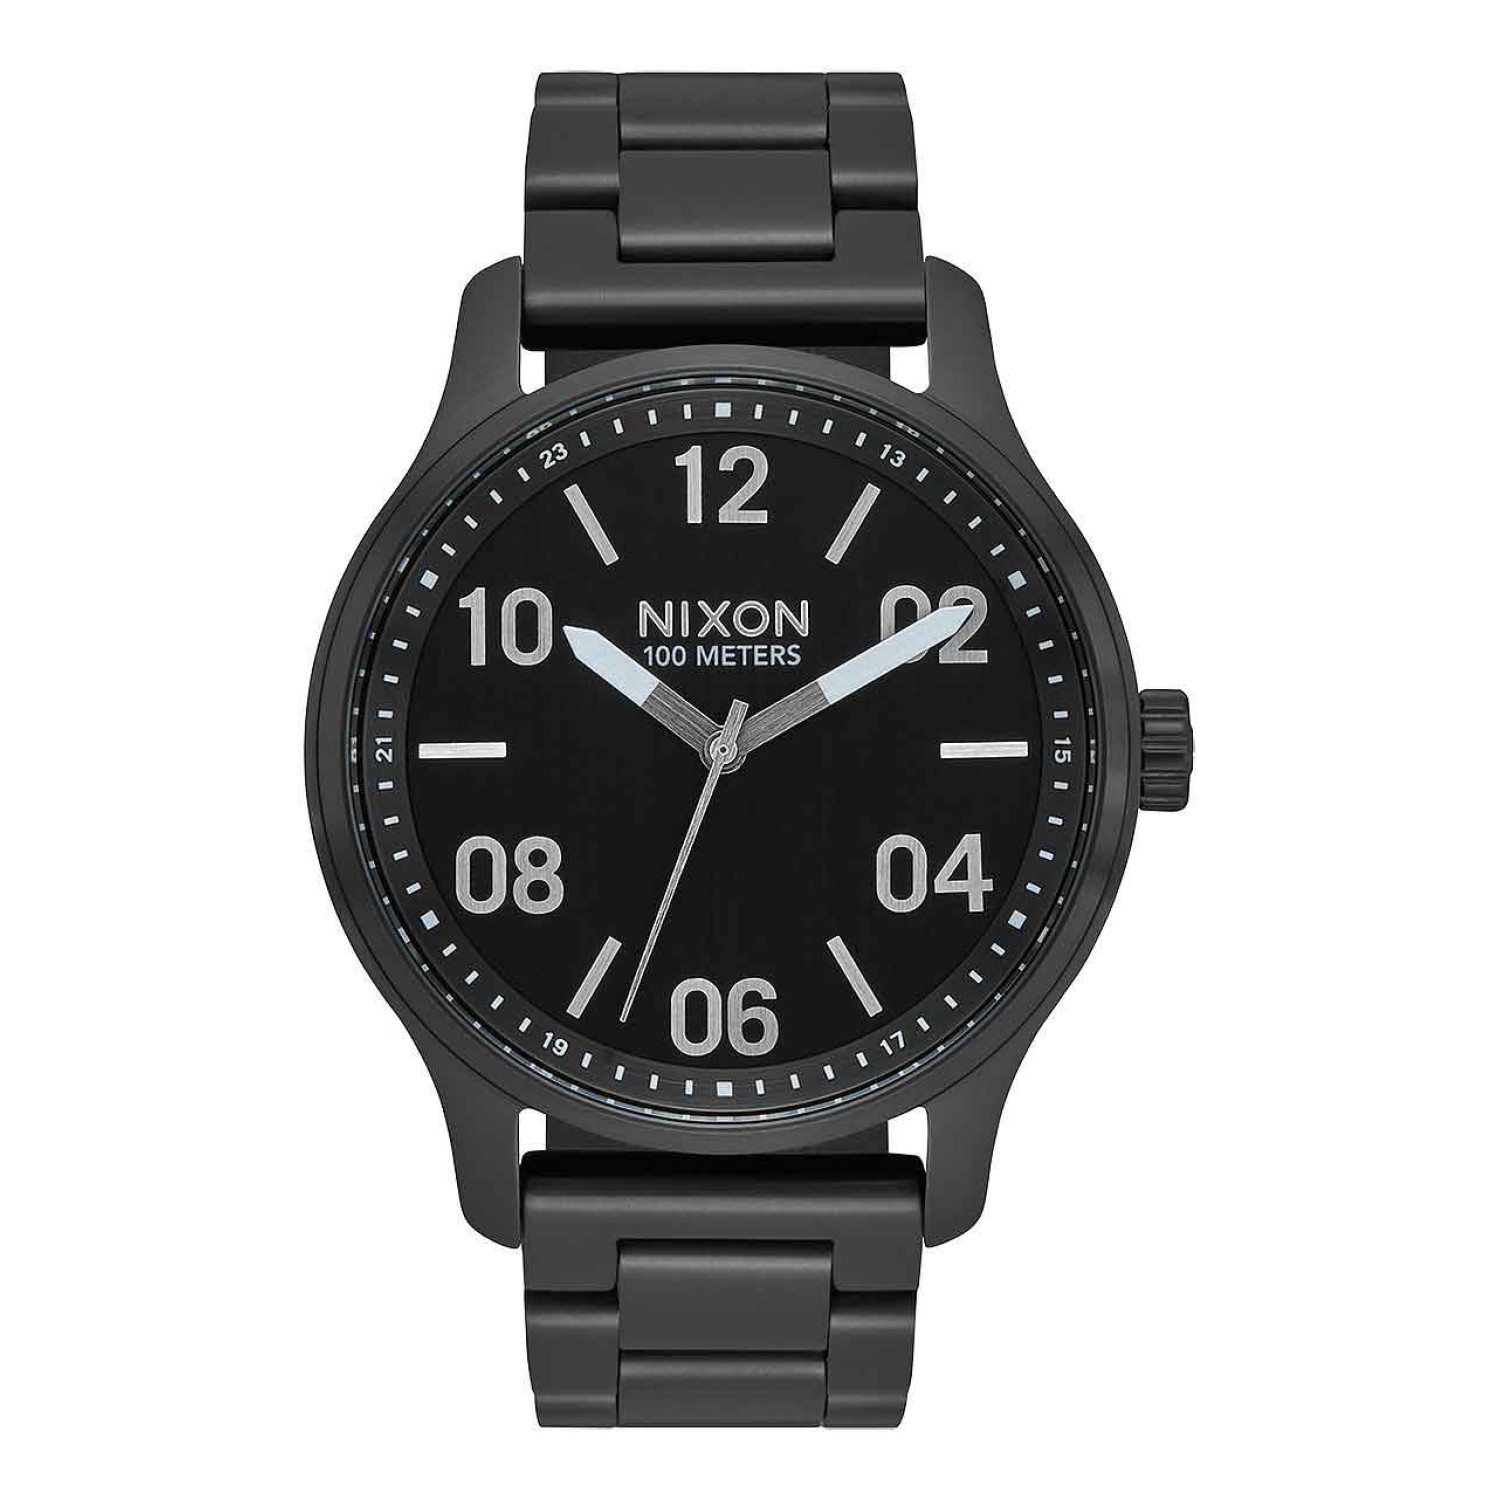 A1242-180-00 NIXON Mens Patrol Watch. A modern interpretation of classic designs, the Patrol is for the makers and doers. Slim case profile and bold indices put the stamp on a new staple.2 Year  Guarantee Oxipay is simply the easier way to pay - use Oxi @